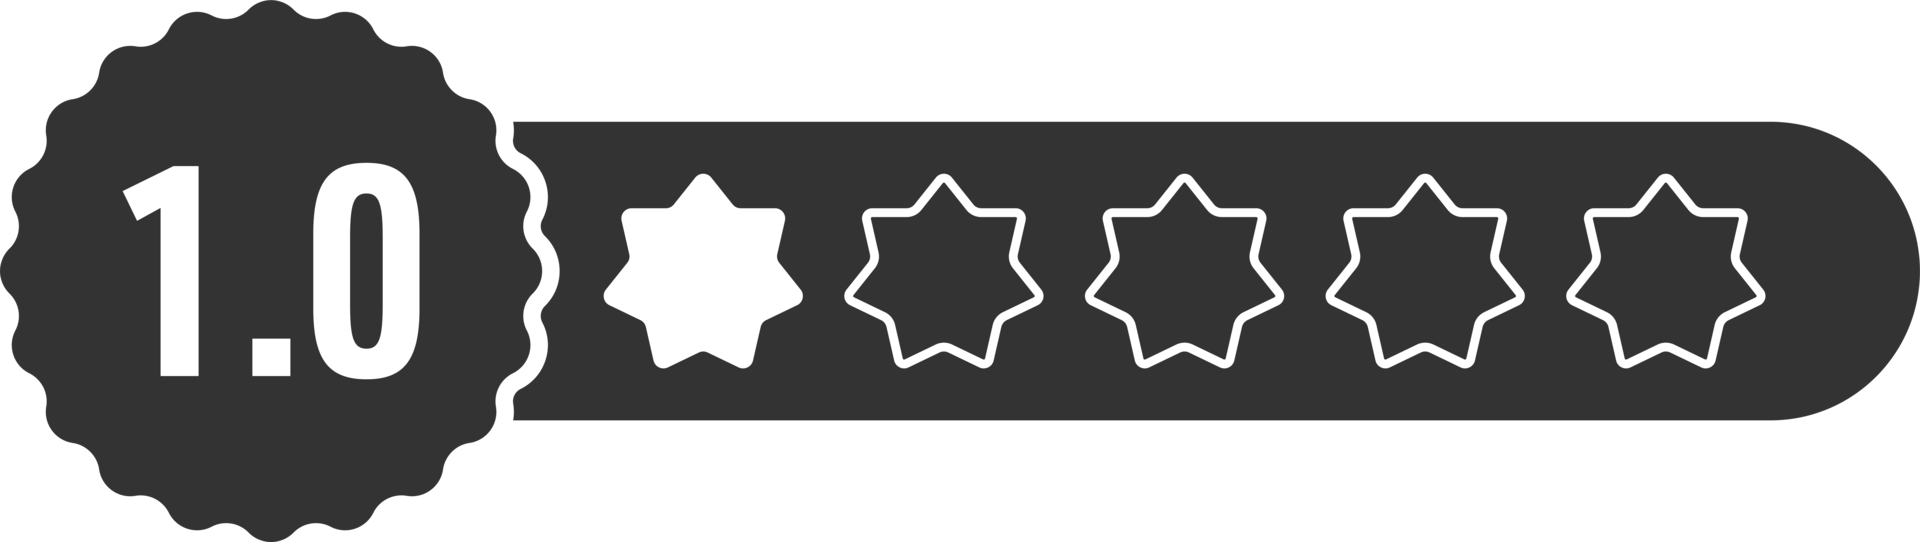 Star rating review clip art png